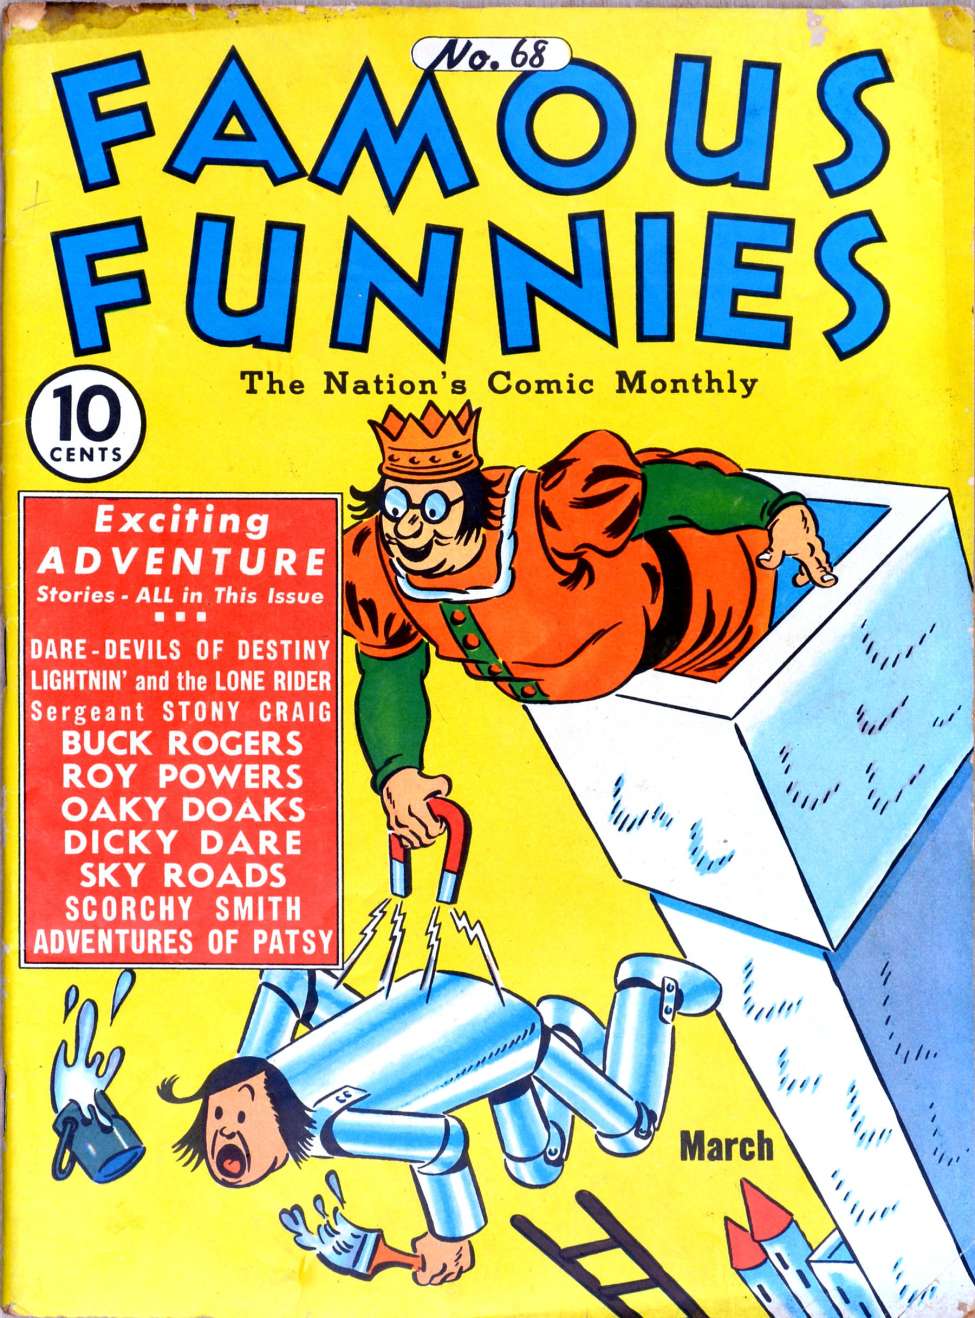 Book Cover For Famous Funnies 68